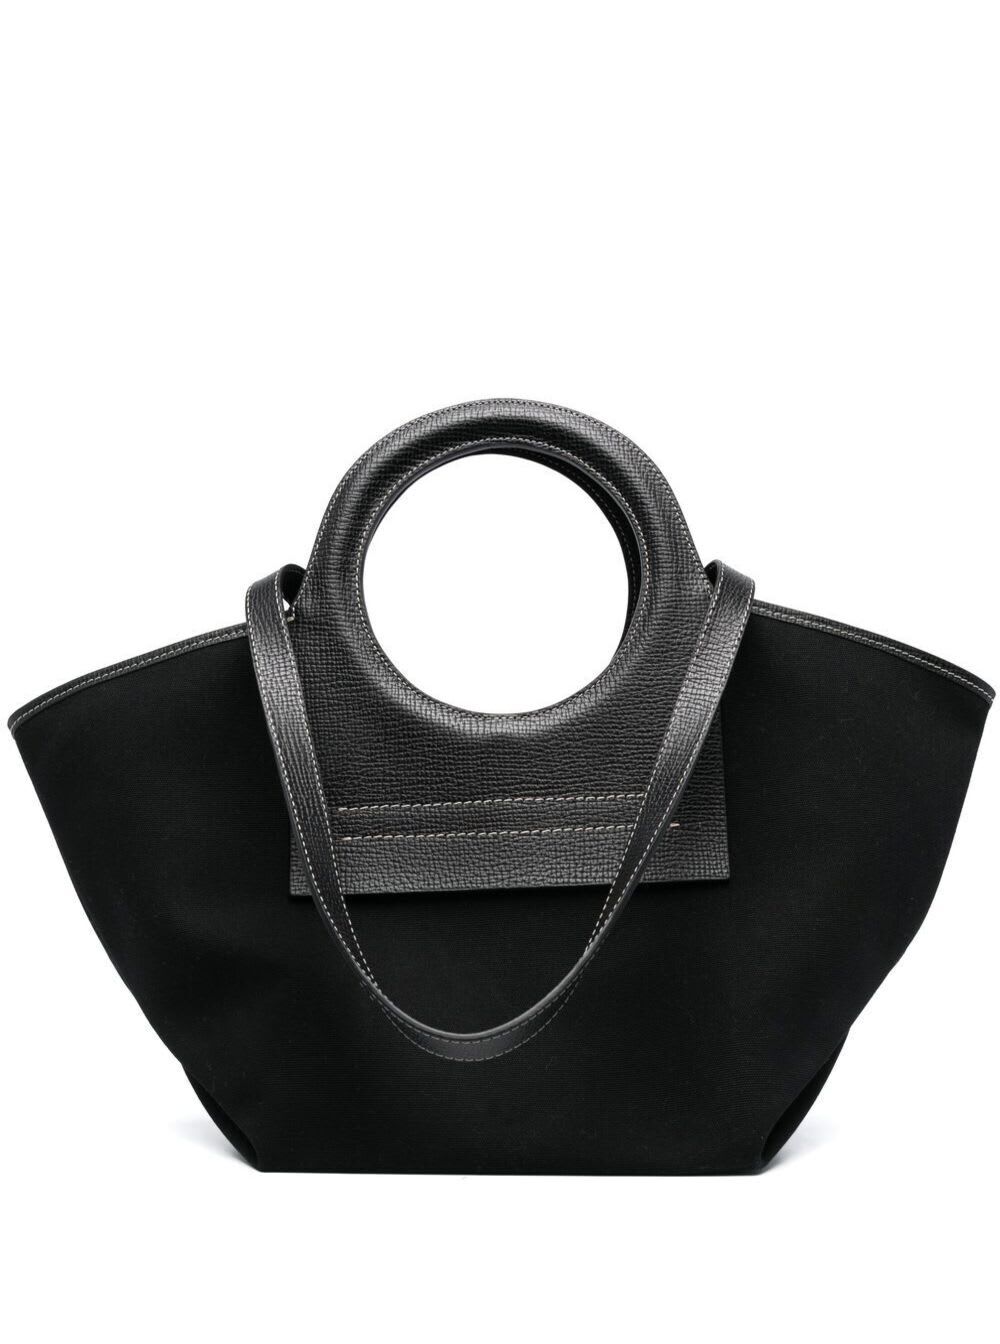 Hereu Cala Small Grainy Canvas Tote Bag With Leather Strap in black